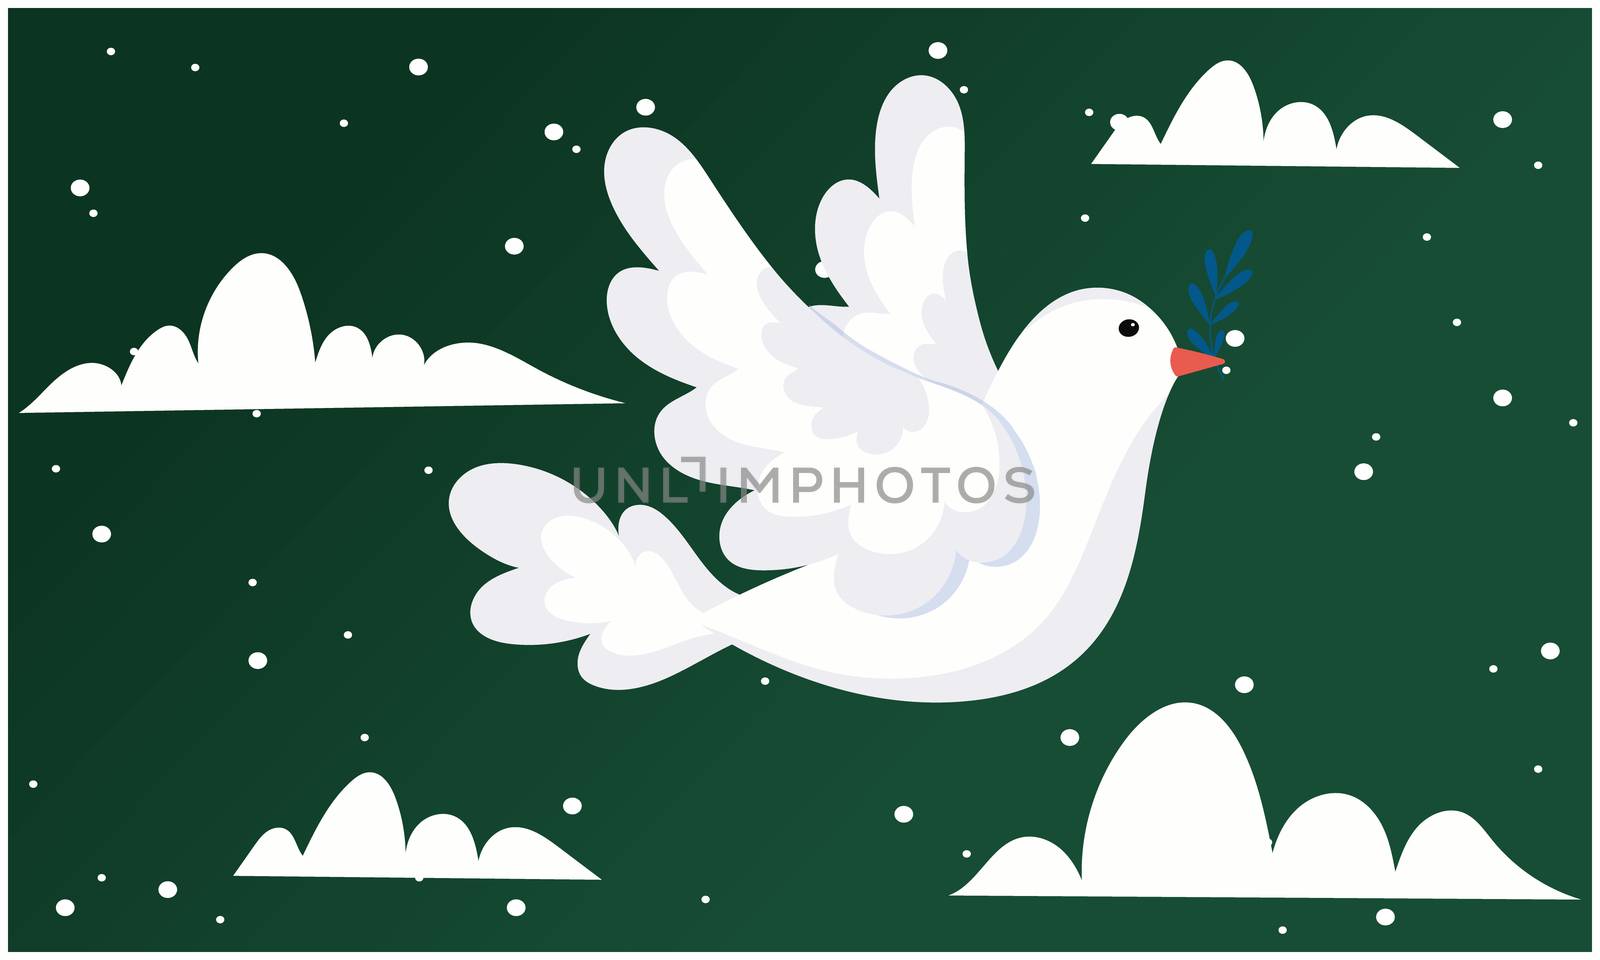 birds and cloud flat design on green background